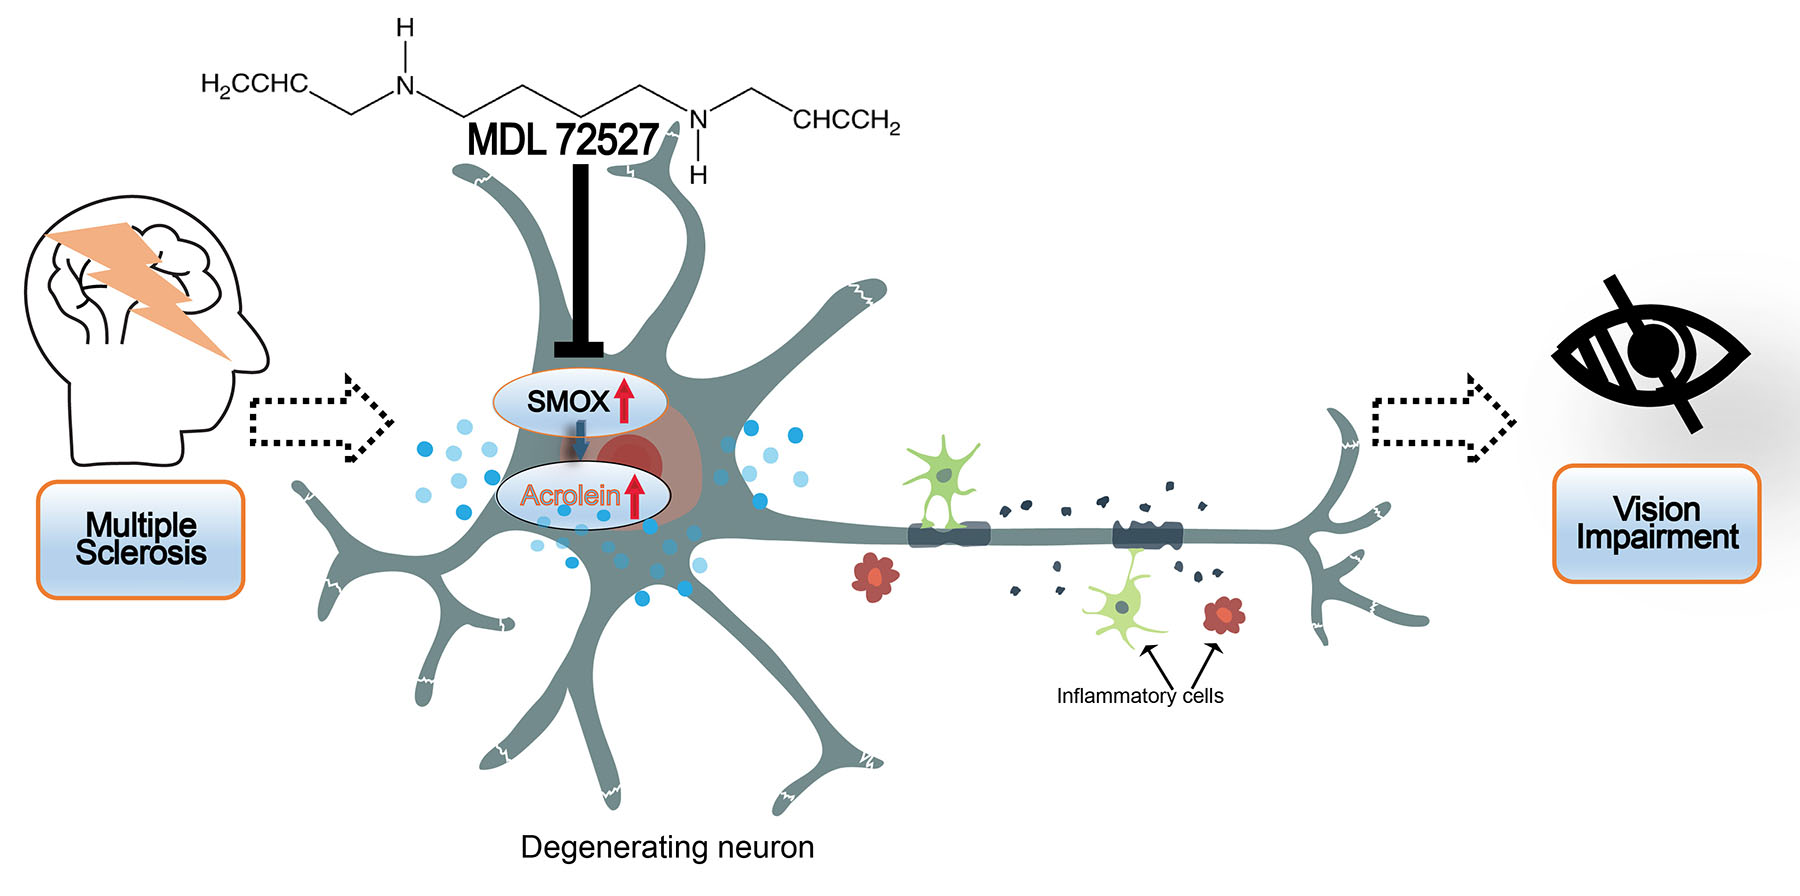 Cells Free Full-Text Treatment with MDL 72527 Ameliorated Clinical Symptoms, Retinal Ganglion Cell Loss, Optic Nerve Inflammation, and Improved Visual Acuity in an Experimental Model of Multiple Sclerosis pic